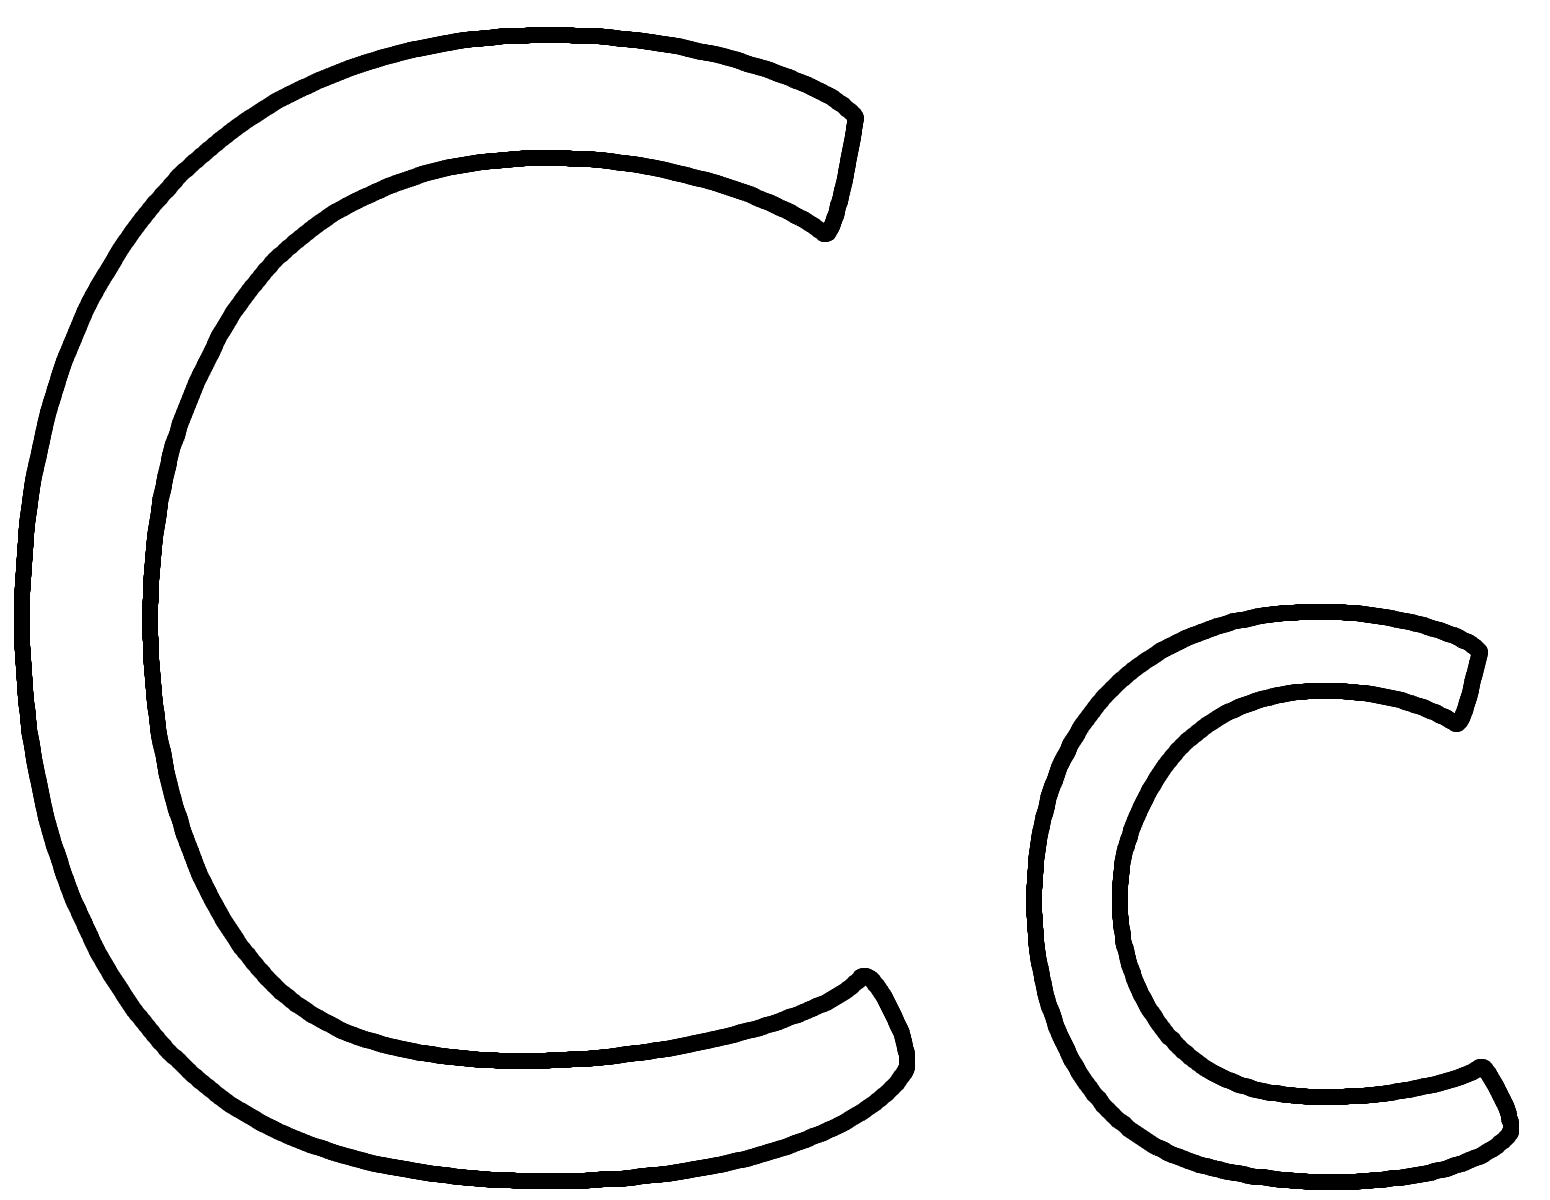 Clip Arts Related To : letter c colouring in sheet. view all Letter C Col.....